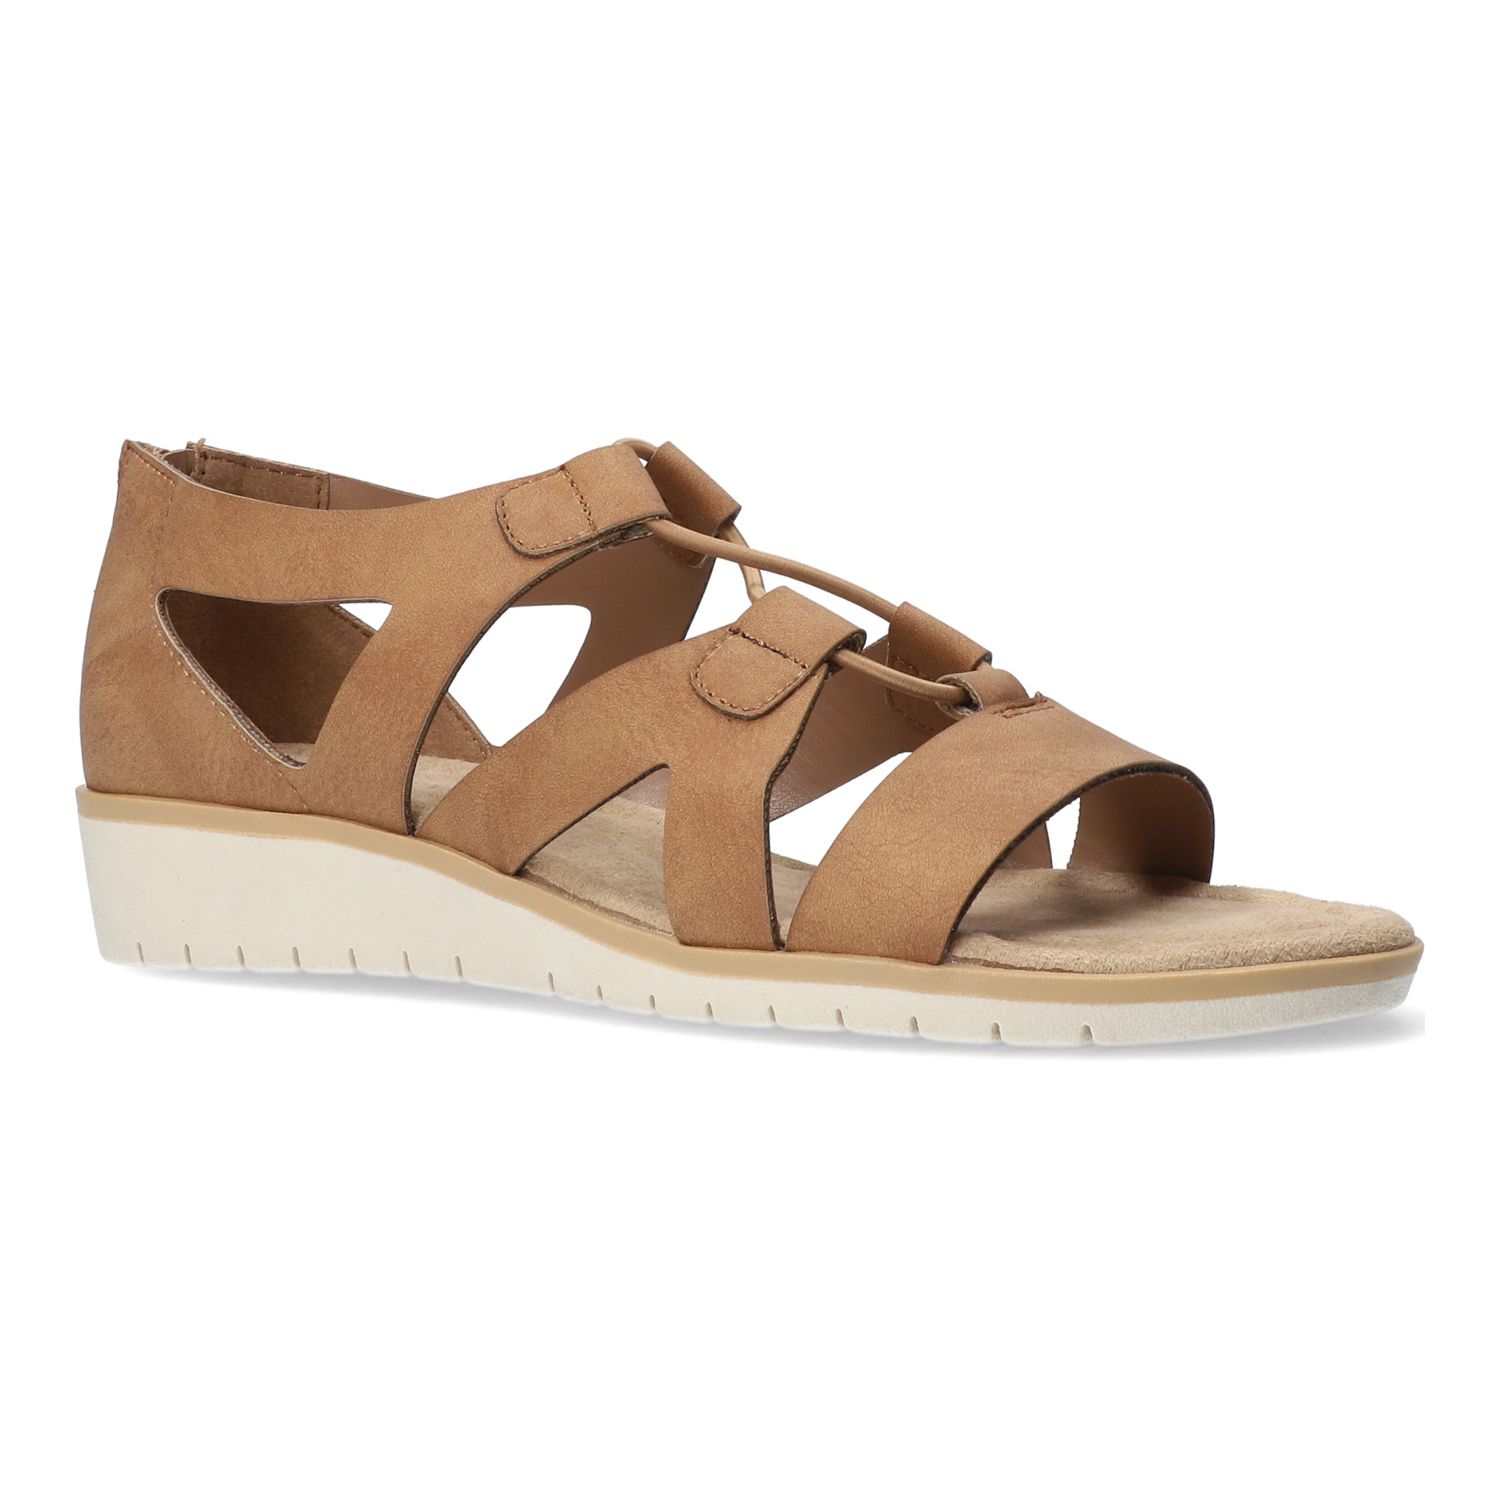 Image for Easy Street Poetry Women's Wedge Sandals at Kohl's.